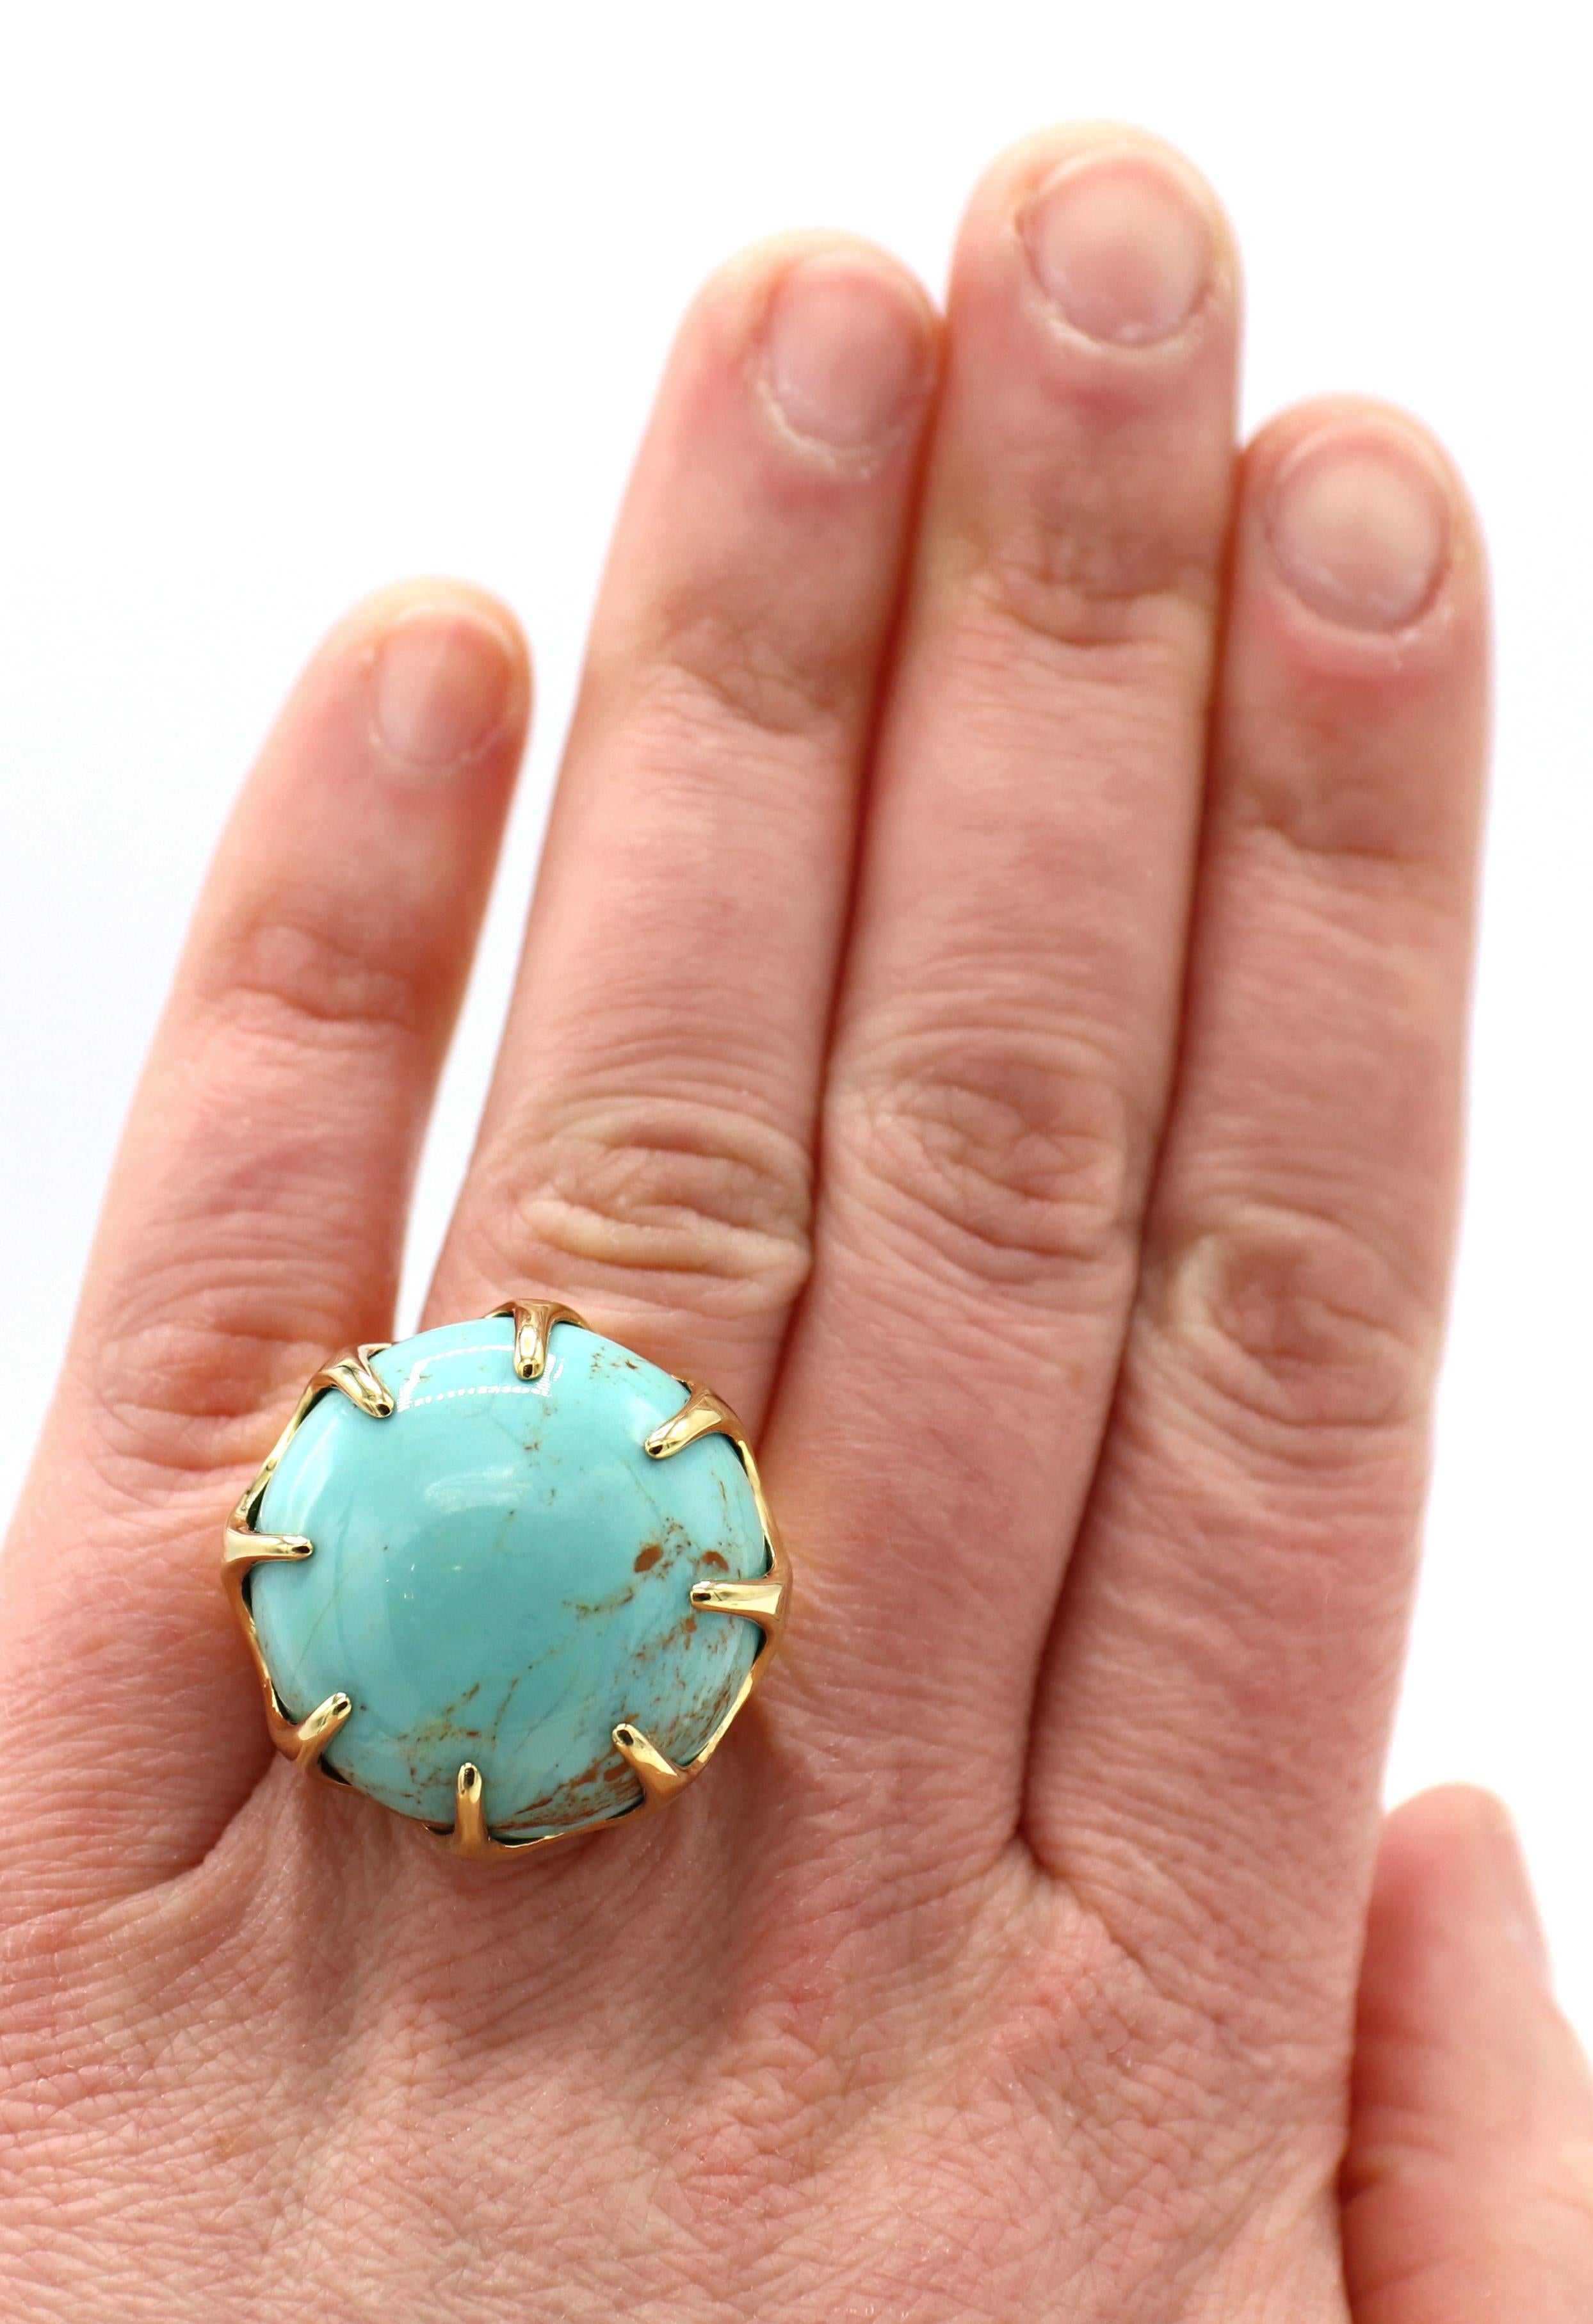 Ippolita Turquoise Cabochon Dome Cocktail Ring 18 Karat Yellow Gold 2